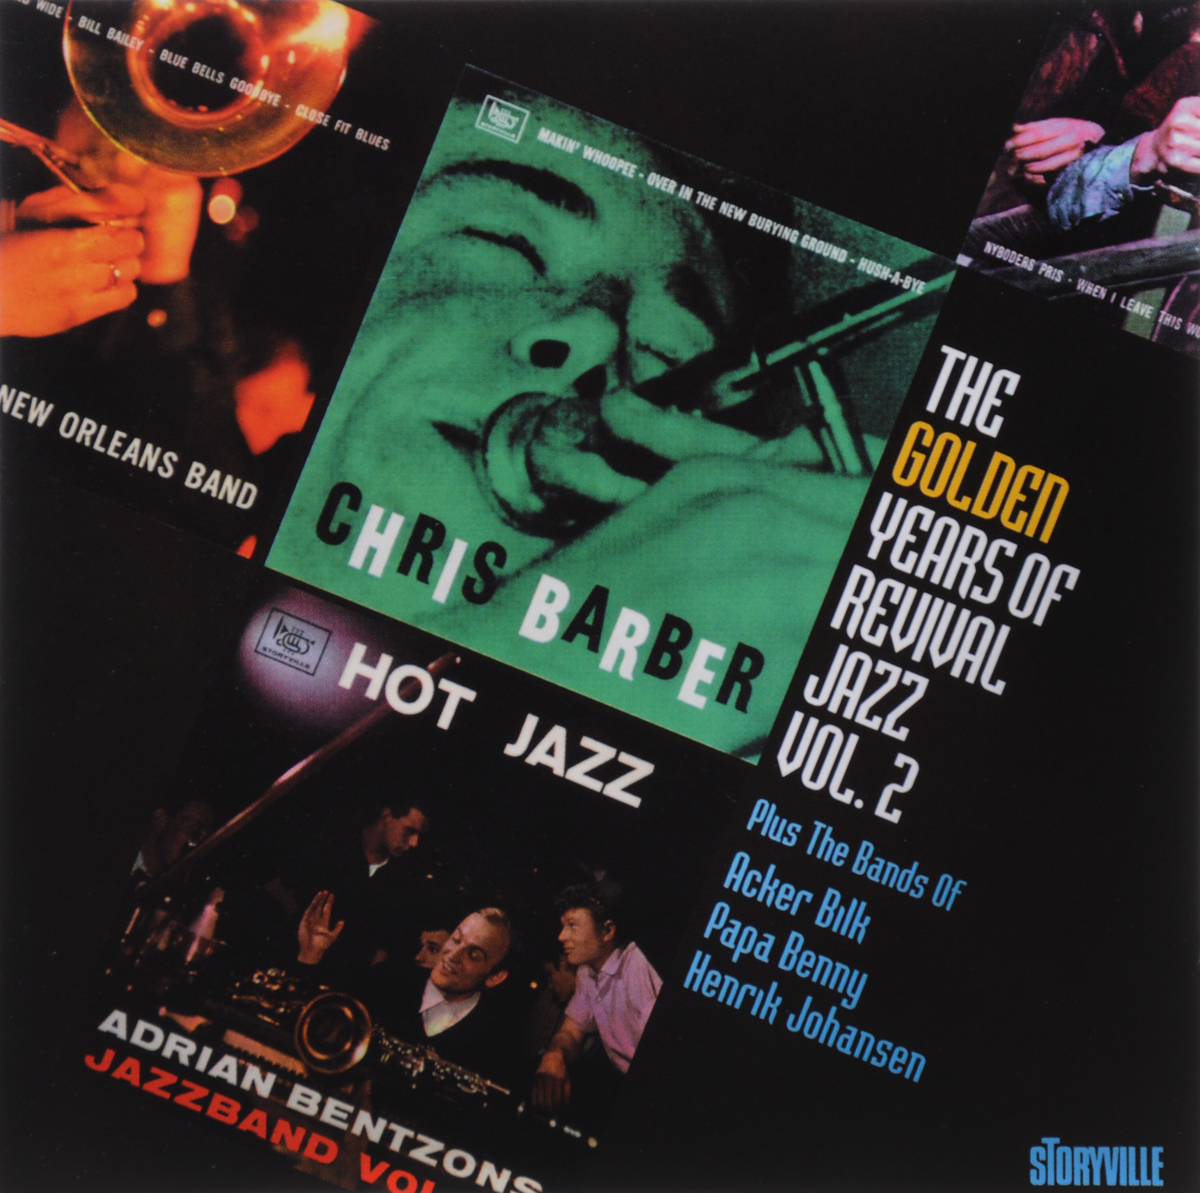 The Golden Years Of Revival Jazz. Vol. 2